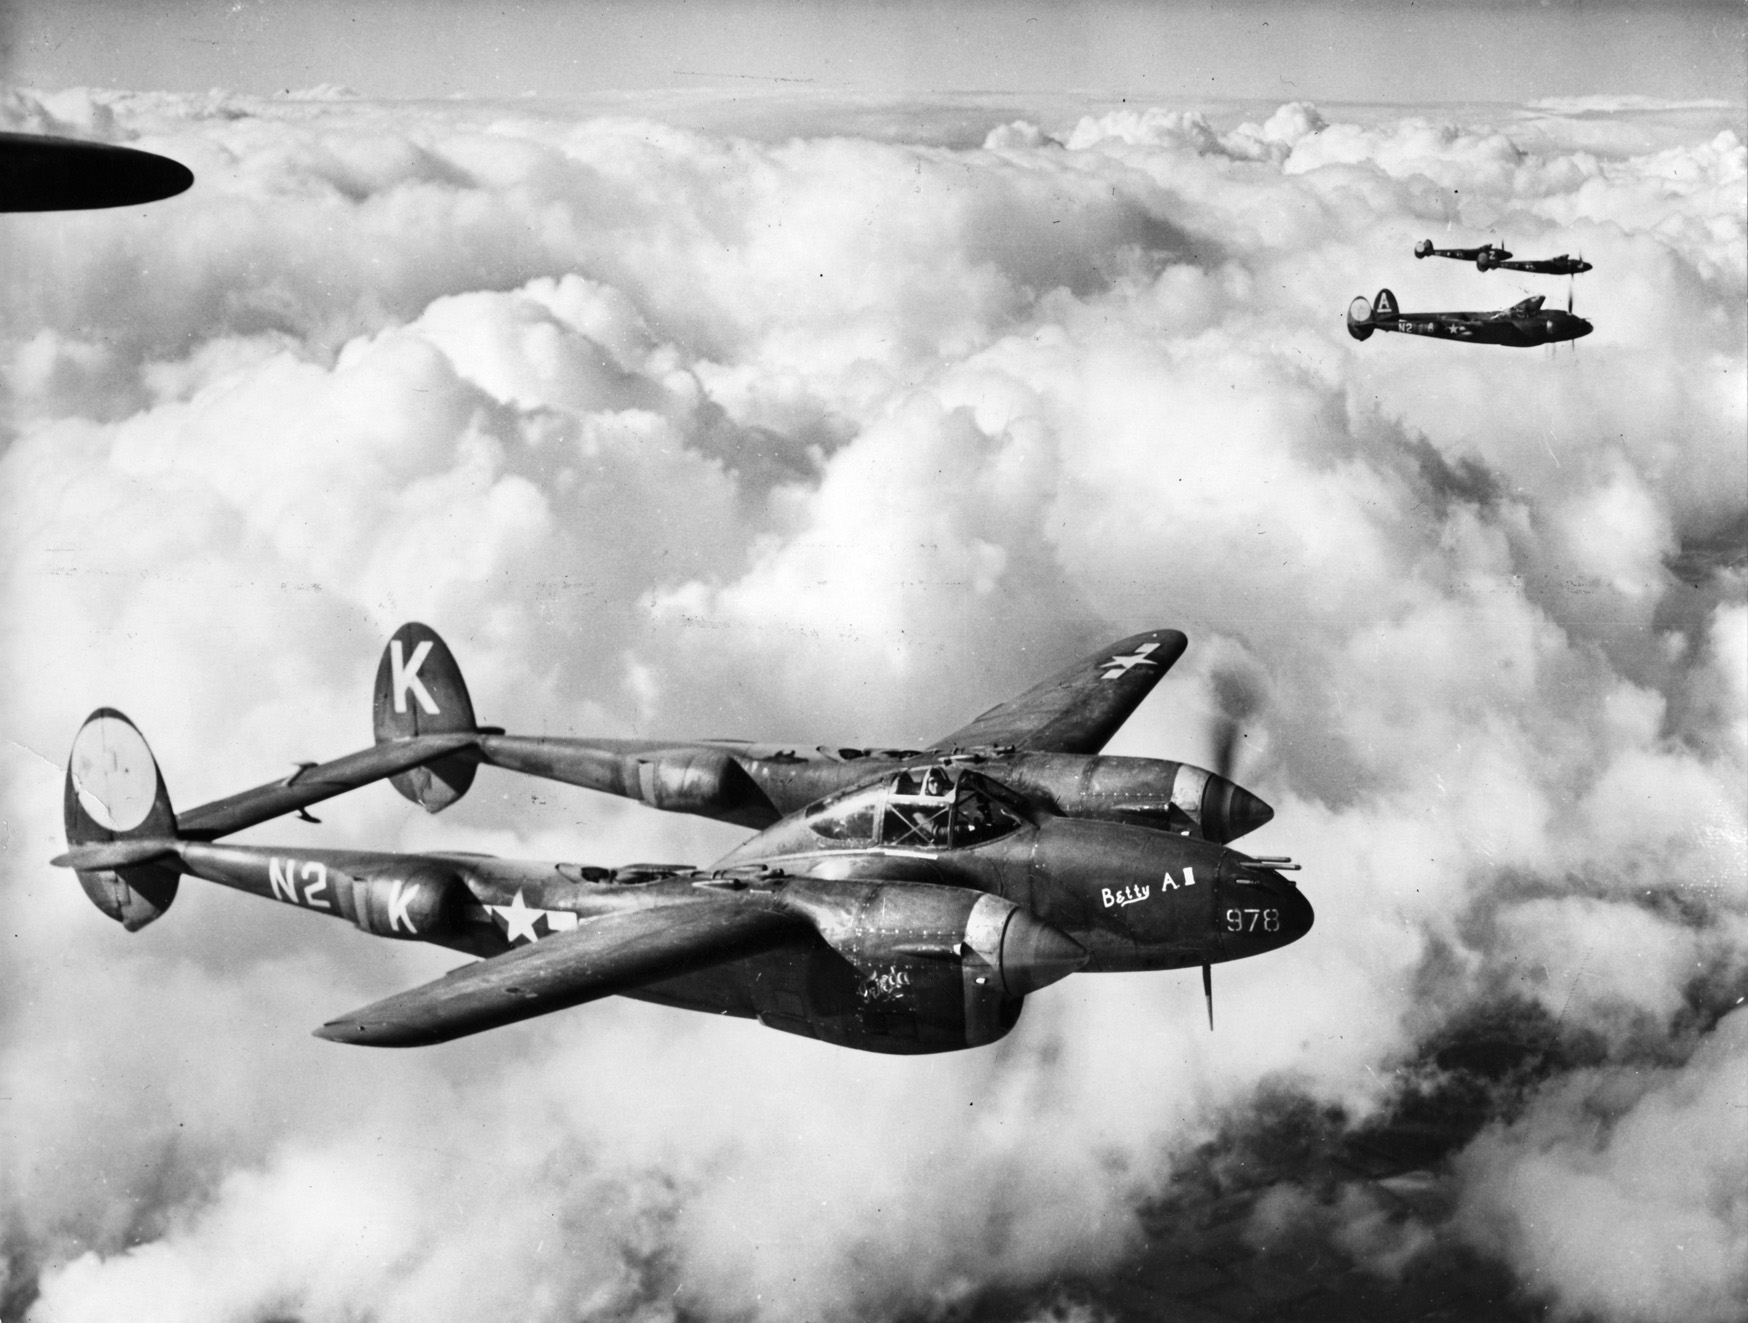 These P-38 fighters of the 383rd Fighter Squadron based in England are shown in flight in 1944.  The versatile Lockheed design served in all theaters of World War II and in roles as a bomber escort, fighter bomber, and reconnaissance aircraft. 